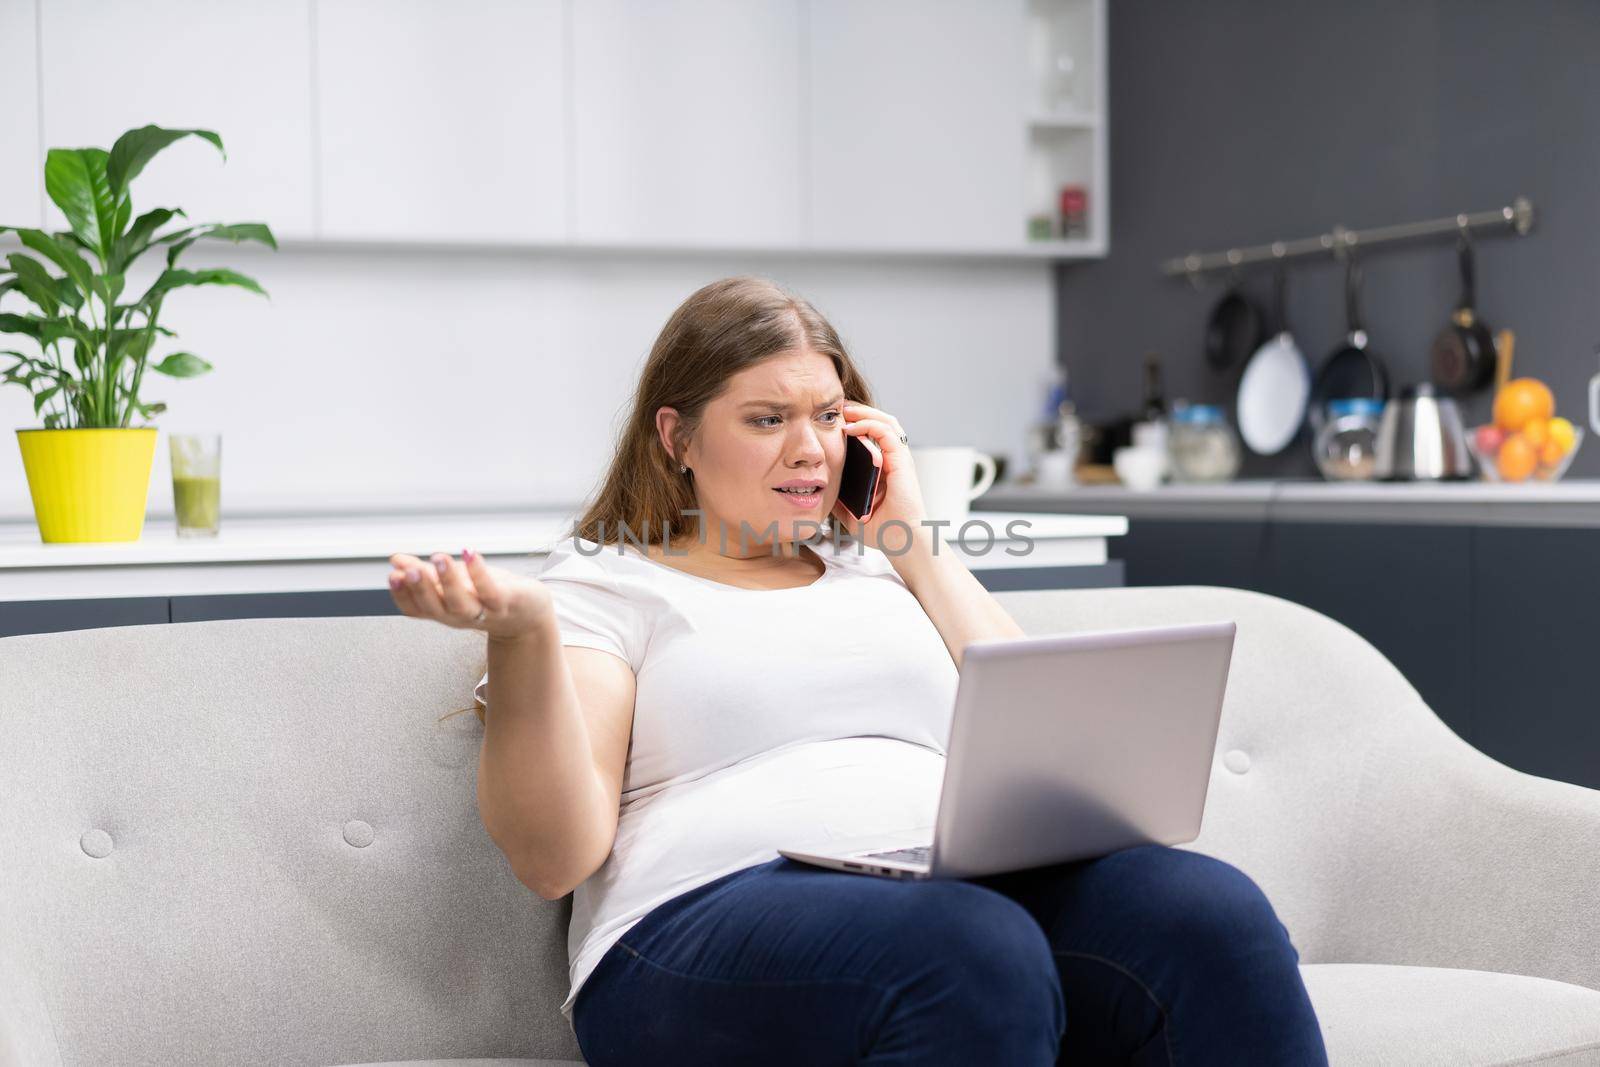 Talking on the phone while working on laptop sitting at home overweight young woman staying at home during quarantine. Self isolation. Working distantly from home using laptop.